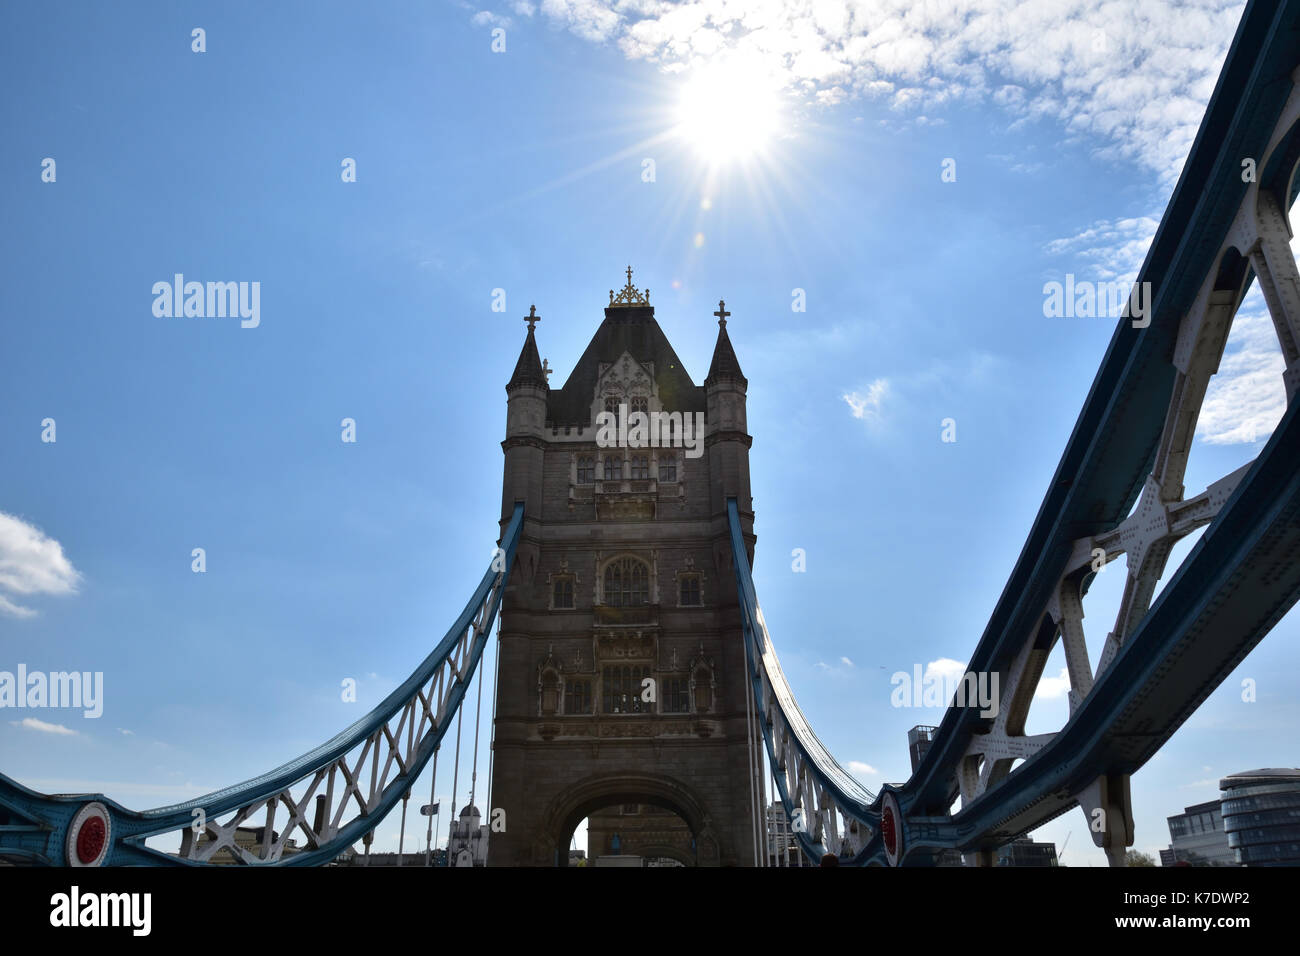 One of the most iconic landmarks in the metropolitan city of London... Tower Bridge. It has the most impressive architecture, bridge over Thames river Stock Photo